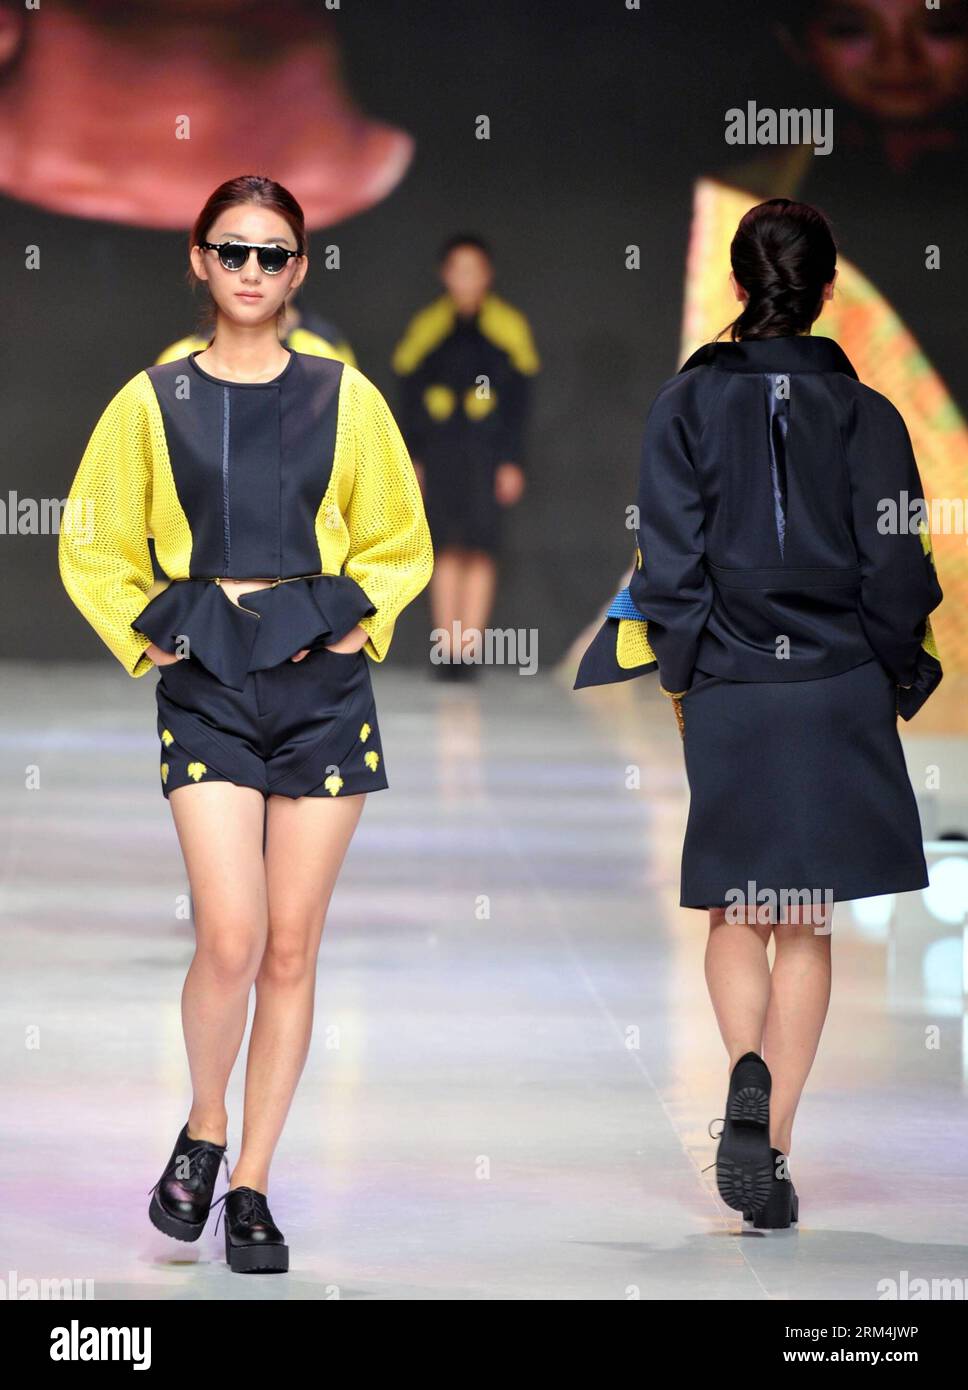 bildnummer 60474189 datum 13092013 copyright imagoxinhua models present creations of casual clothing during the final session of the eastern division of the 22th jeanswest fashion design contest in nanjing capital of east china s jiangsu province sept 13 2013 xinhua ry china nanjing jeanswest design contest cn publicationxnotxinxchn model kultur entertainment modenschau wettbewerb fashion mode xdp x0x 2013 hoch 60474189 date 13 09 2013 copyright imago xinhua models present creations of casual clothing during the final session of the eastern division of the jean west fas 2RM4JWP